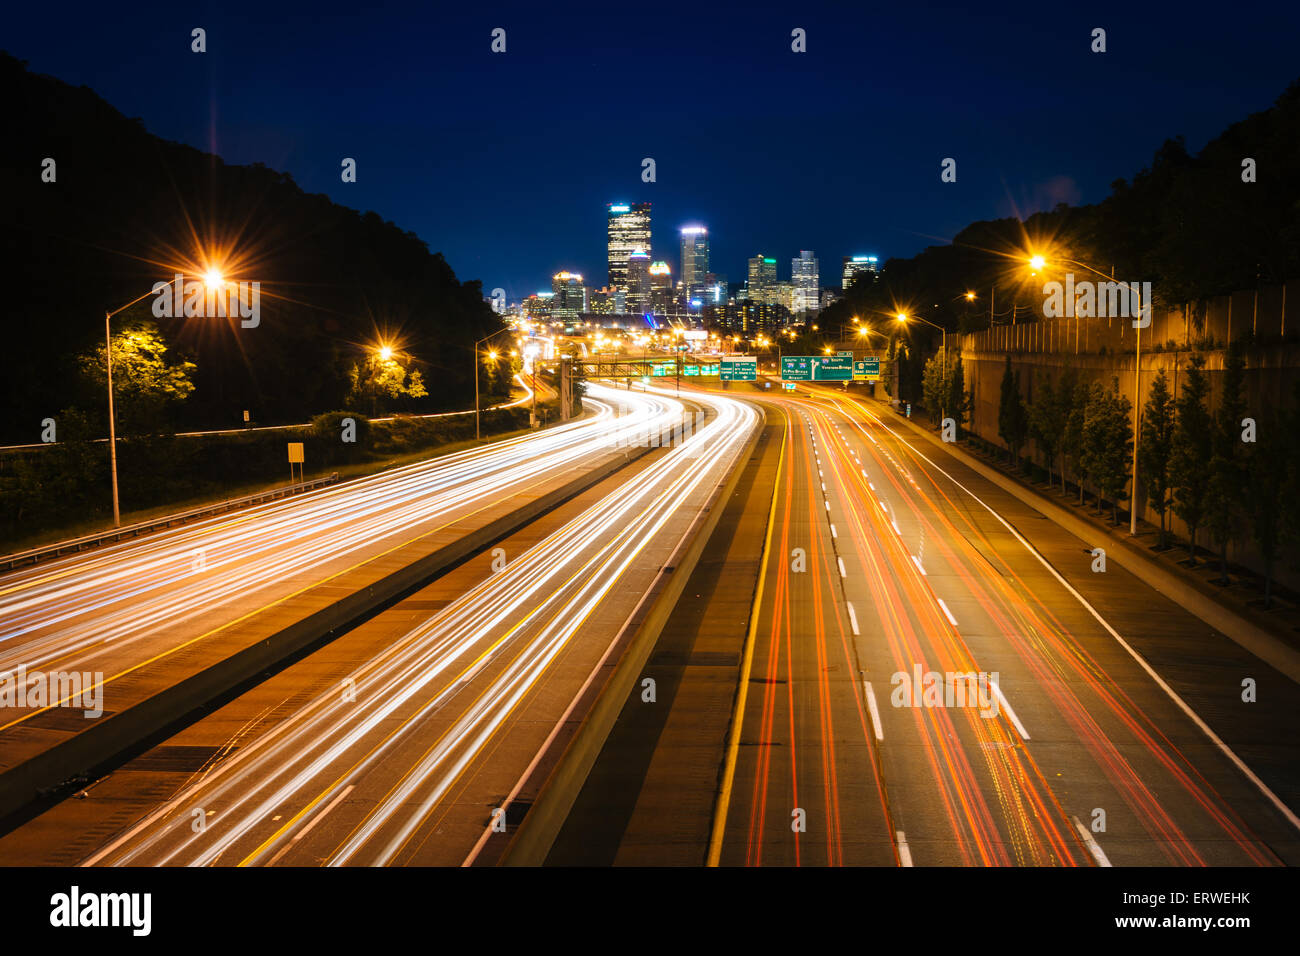 The Pittsburgh skyline and I-279 at night, in Pittsburgh, Pennsylvania. Stock Photo